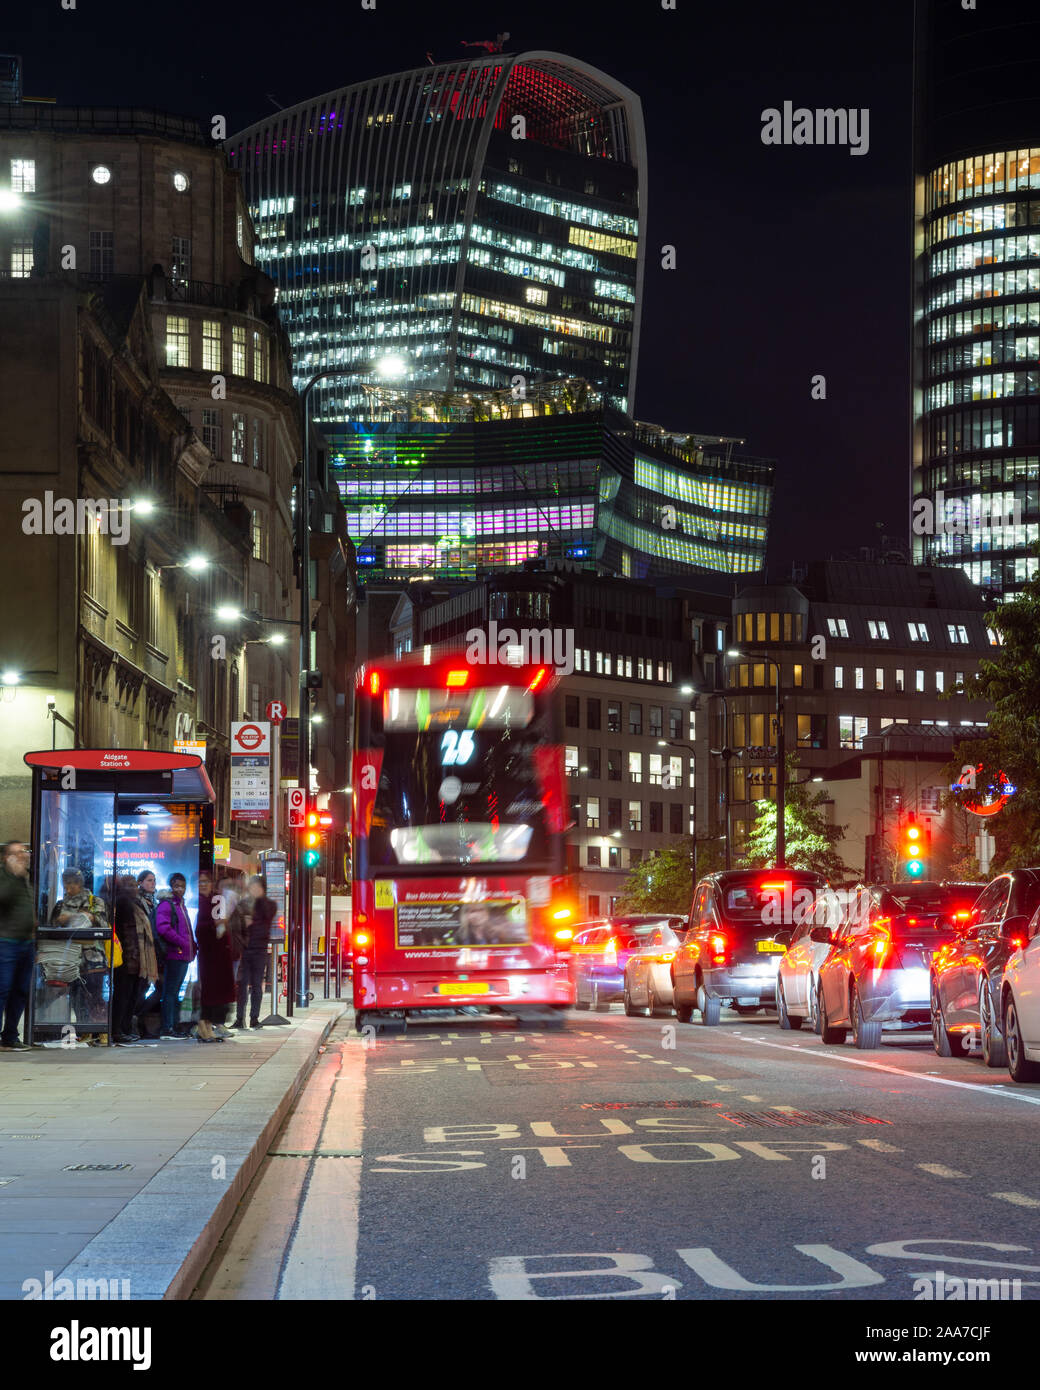 London, England, UK - November 7, 2019: A double-decker London Bus and other traffic moves along Aldgate High Street under the office skyscrapers of t Stock Photo